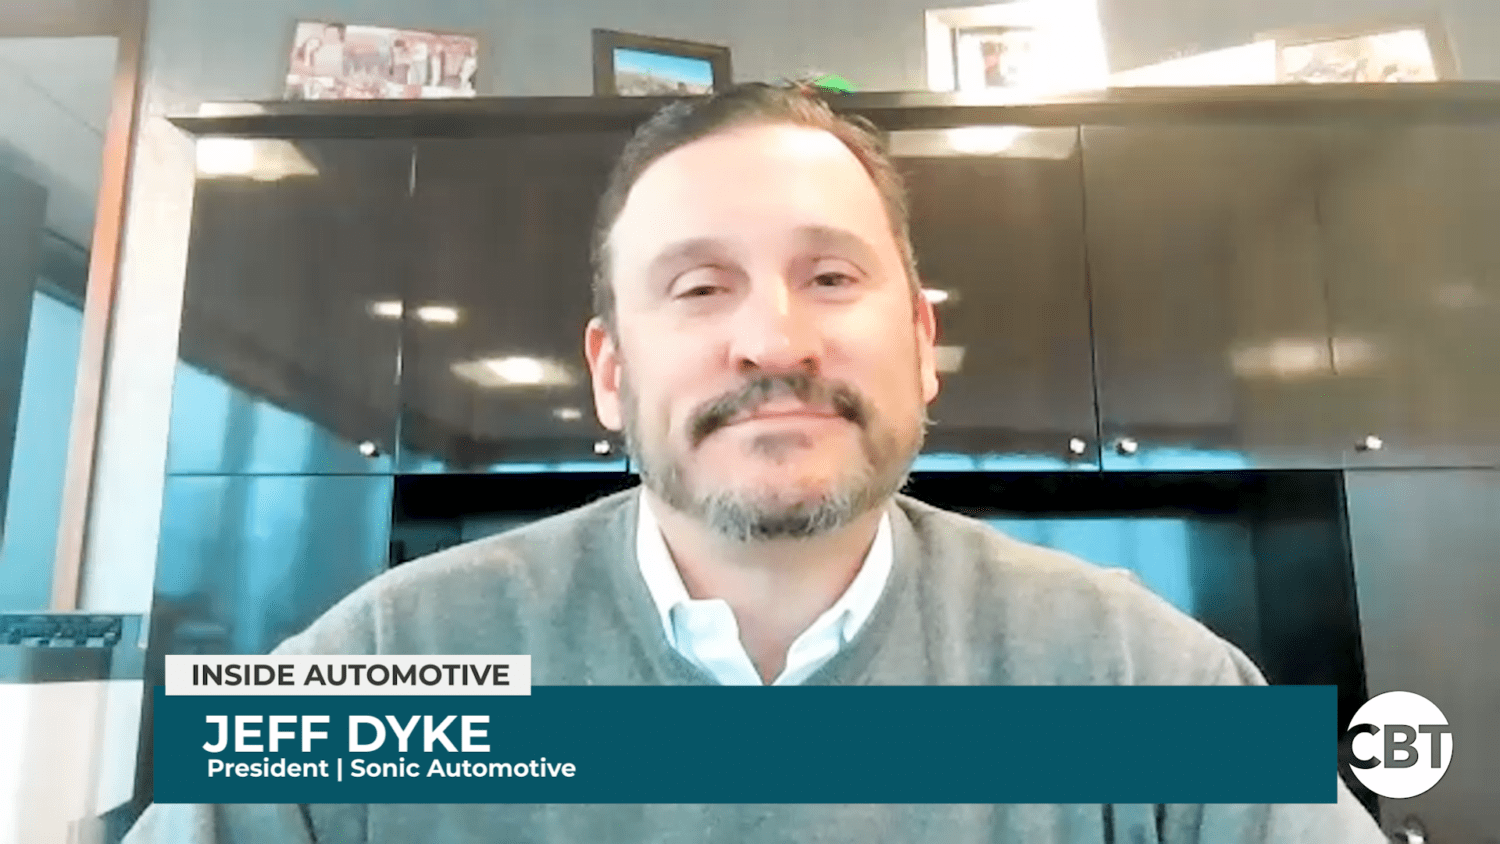 Jeff Dyke joins Inside Automotive to discuss how Sonic Automotive achieved its third most profitable year in 2023.